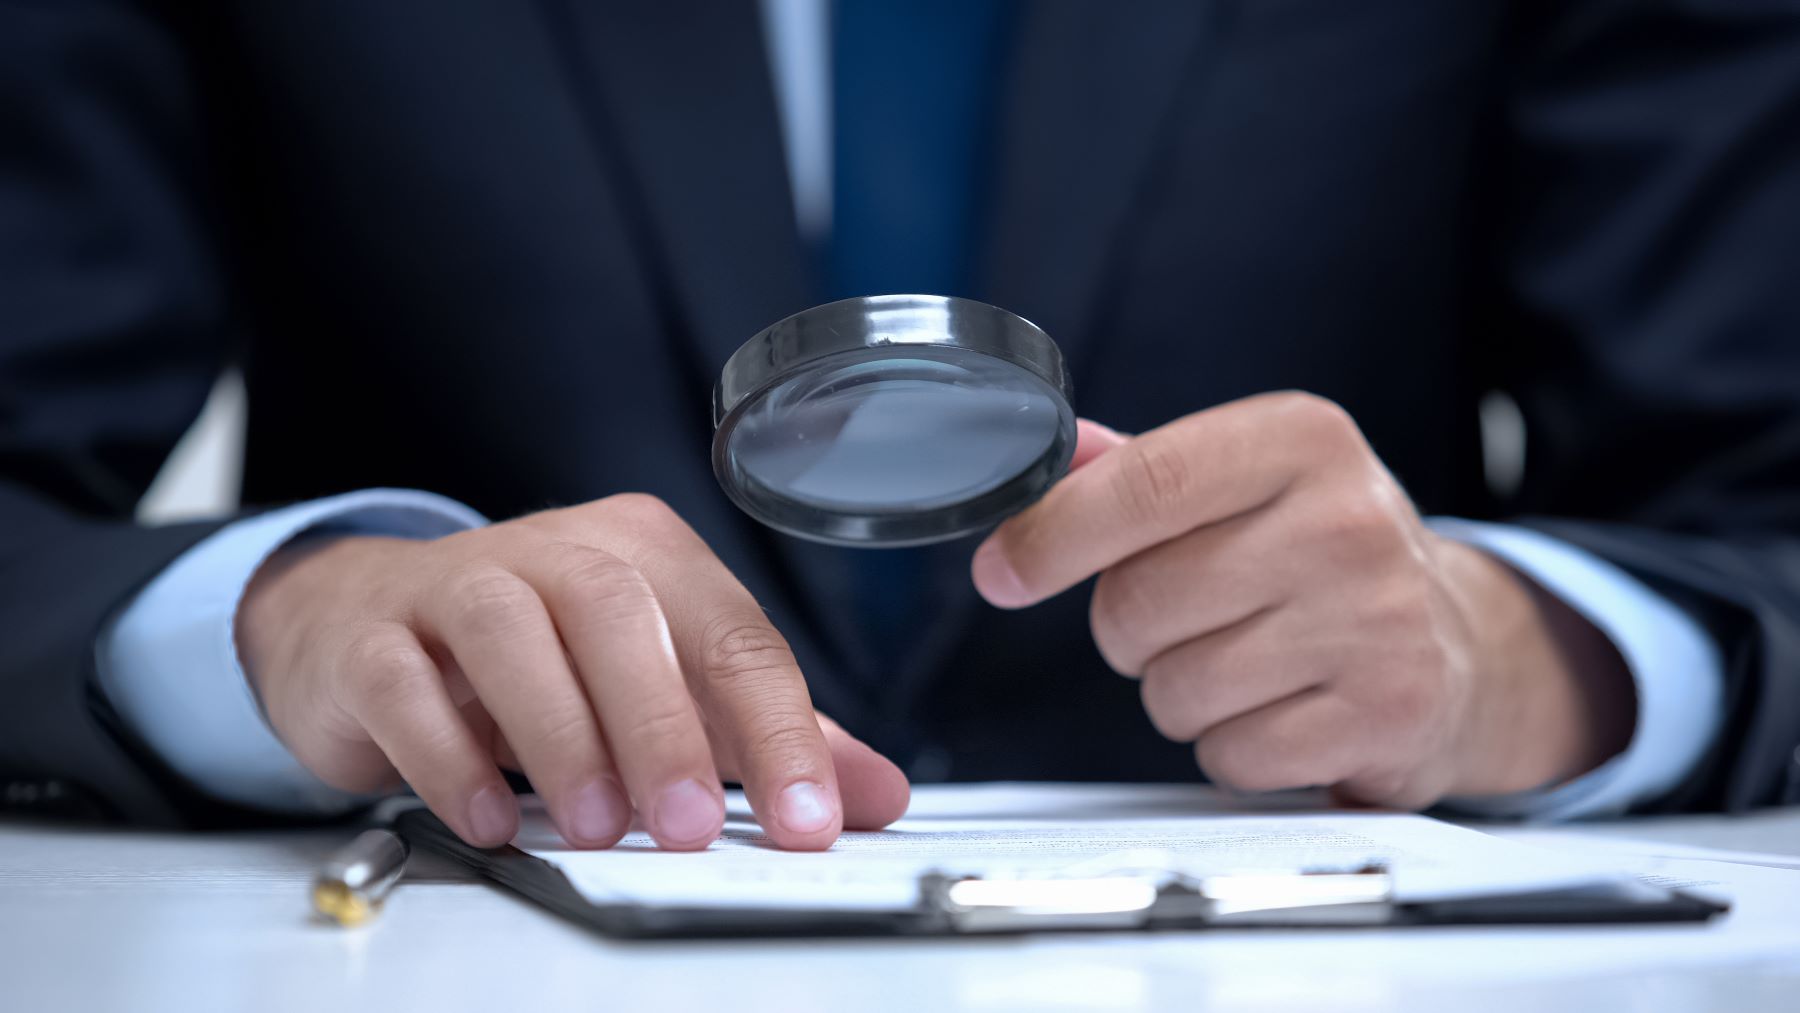 About criminal records, conducting due diligence